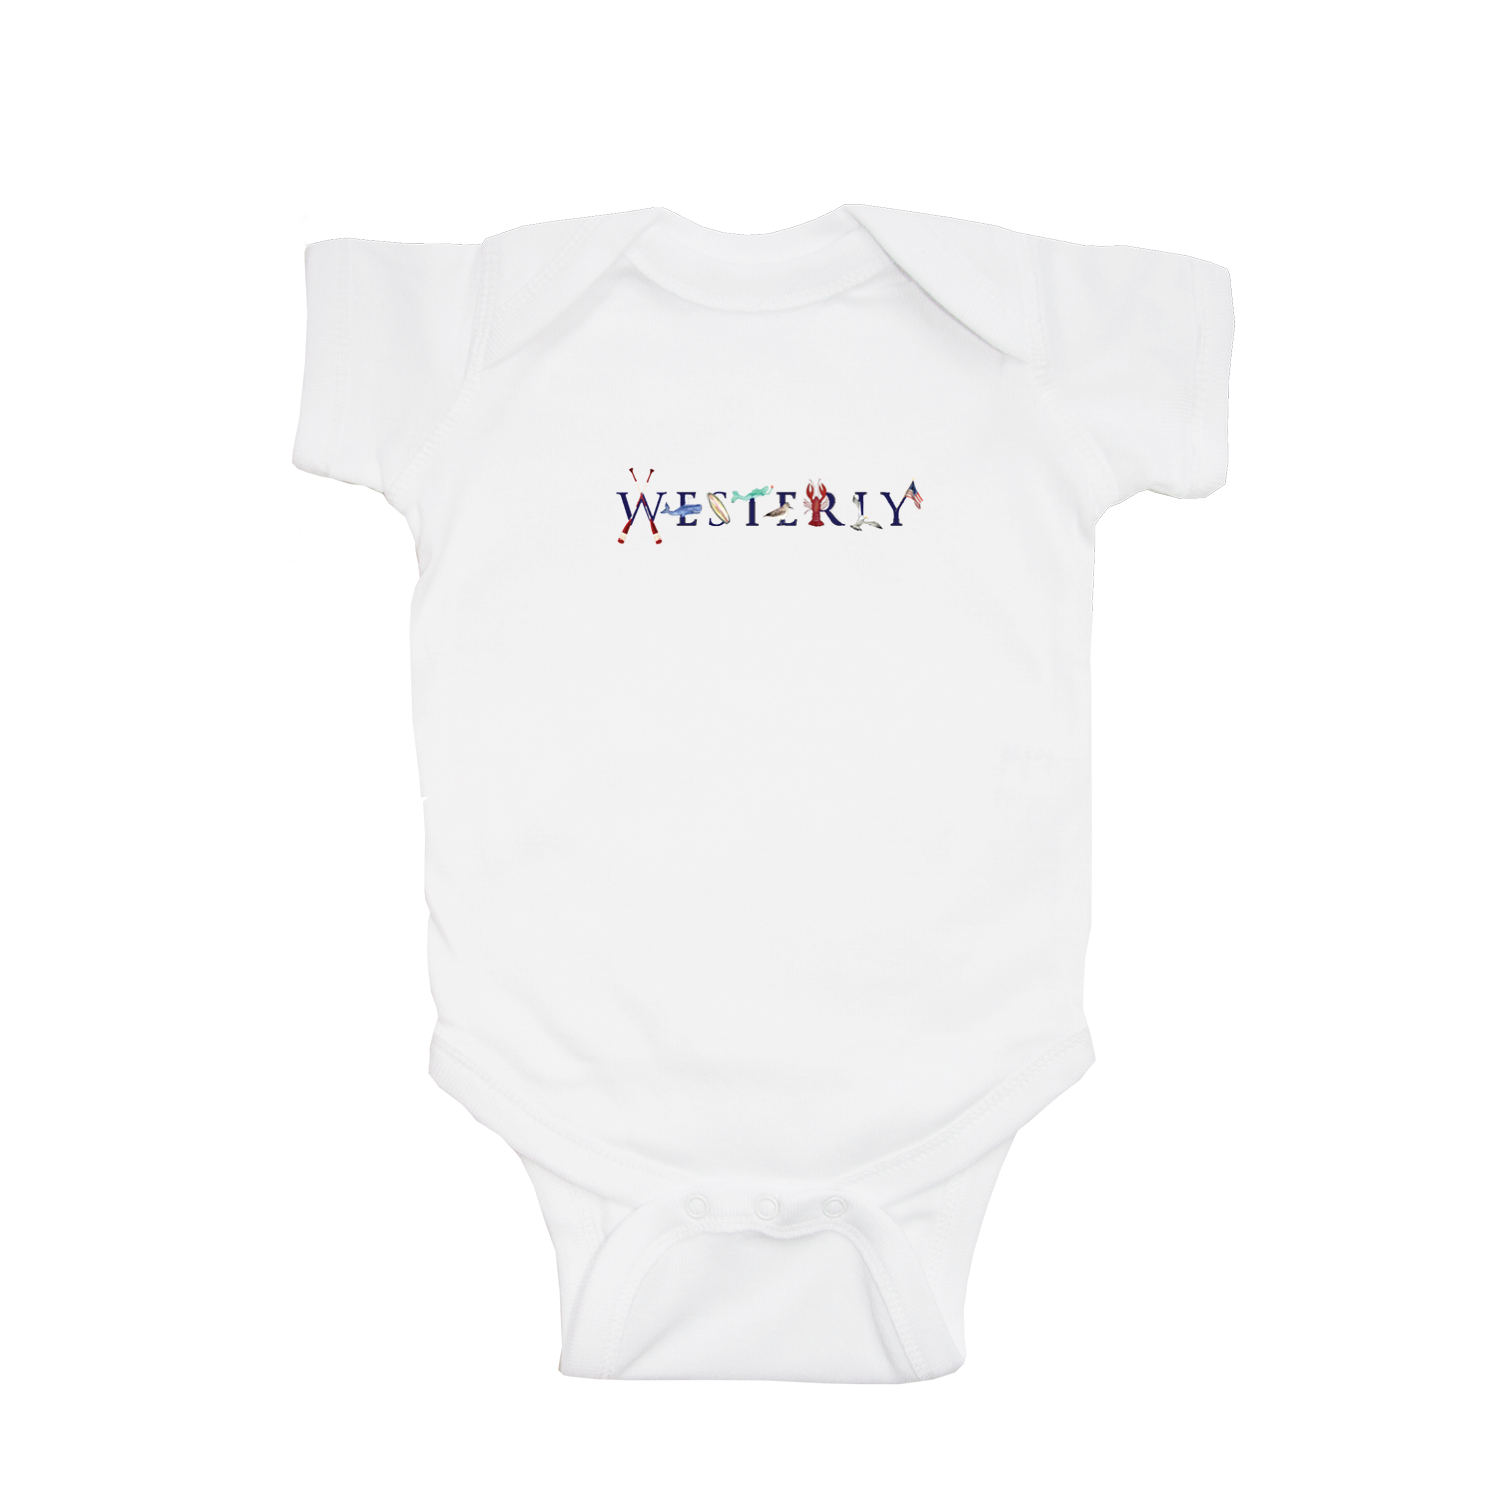 Westerly baby snap up short sleeve